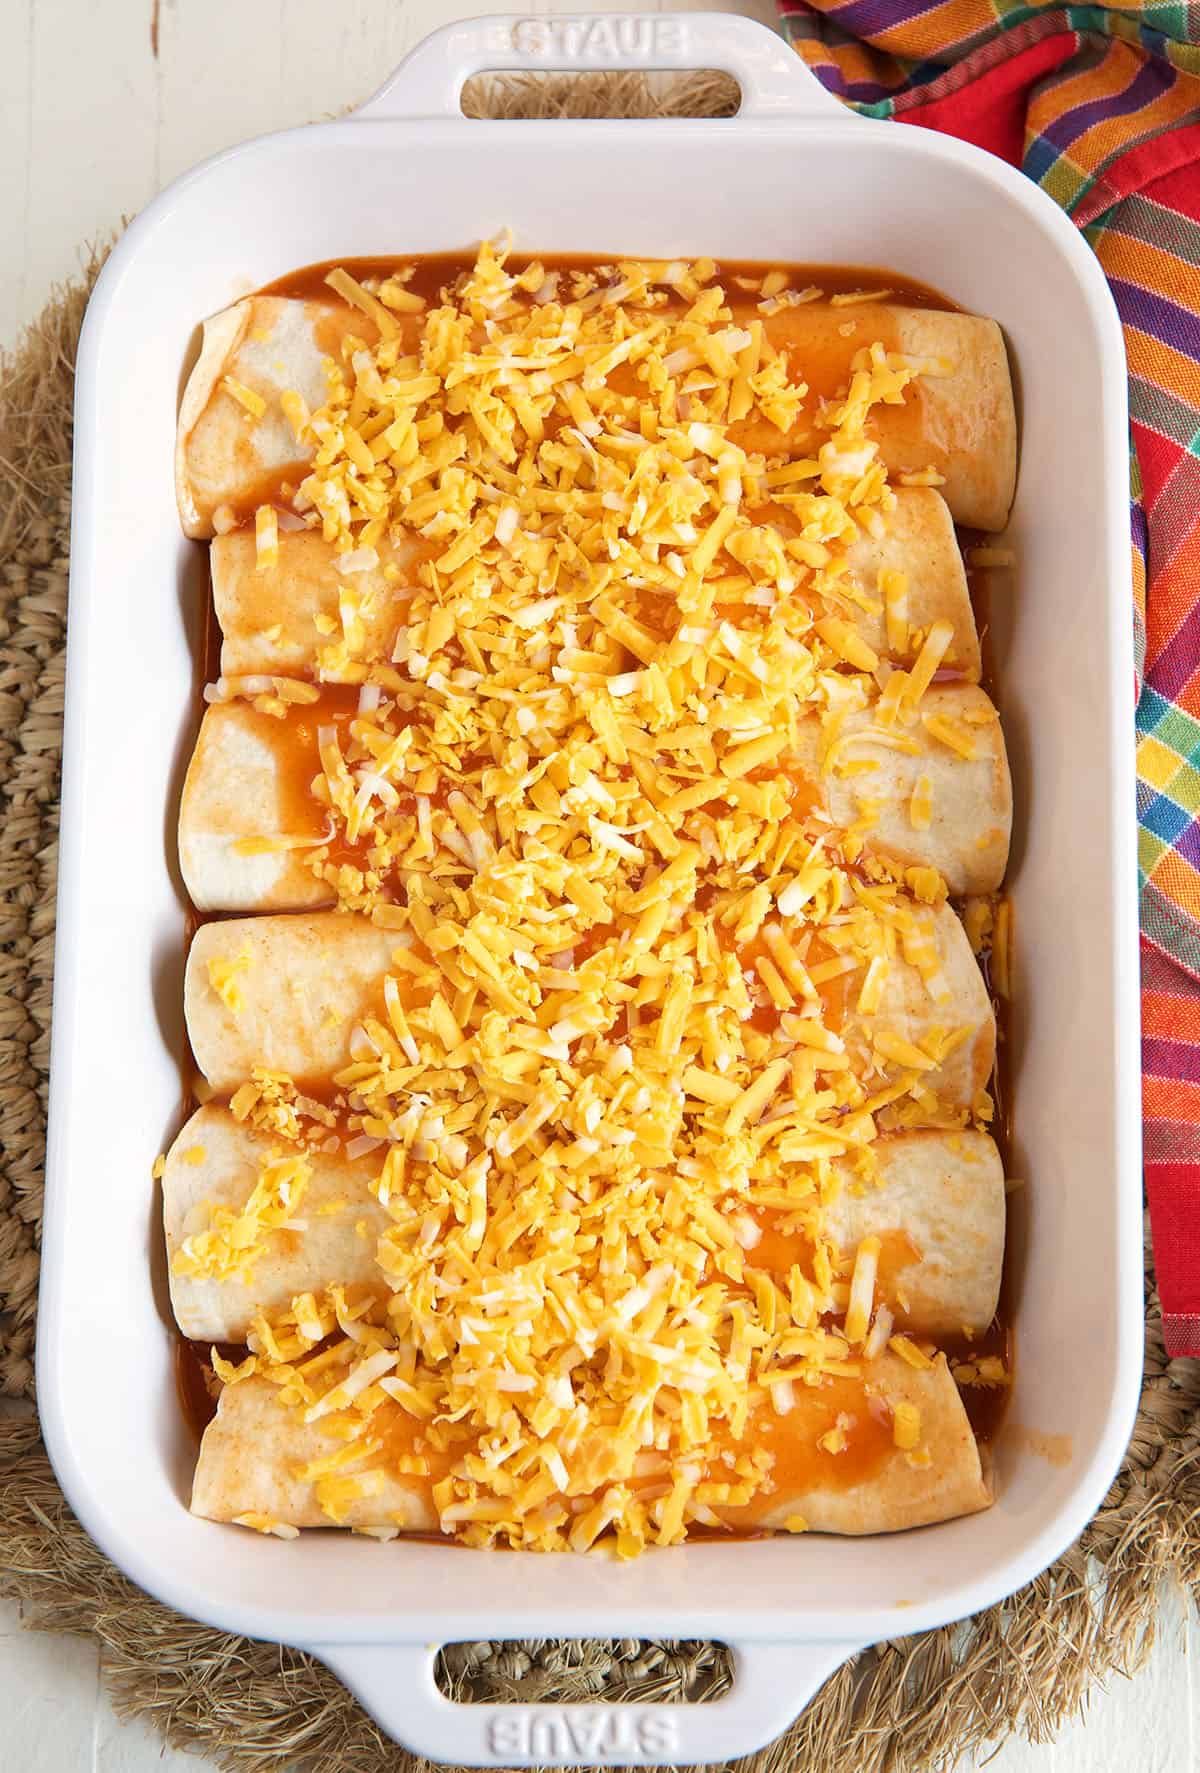 Shredded cheese and enchilada sauce are spread all over uncooked enchiladas in a baking dish.